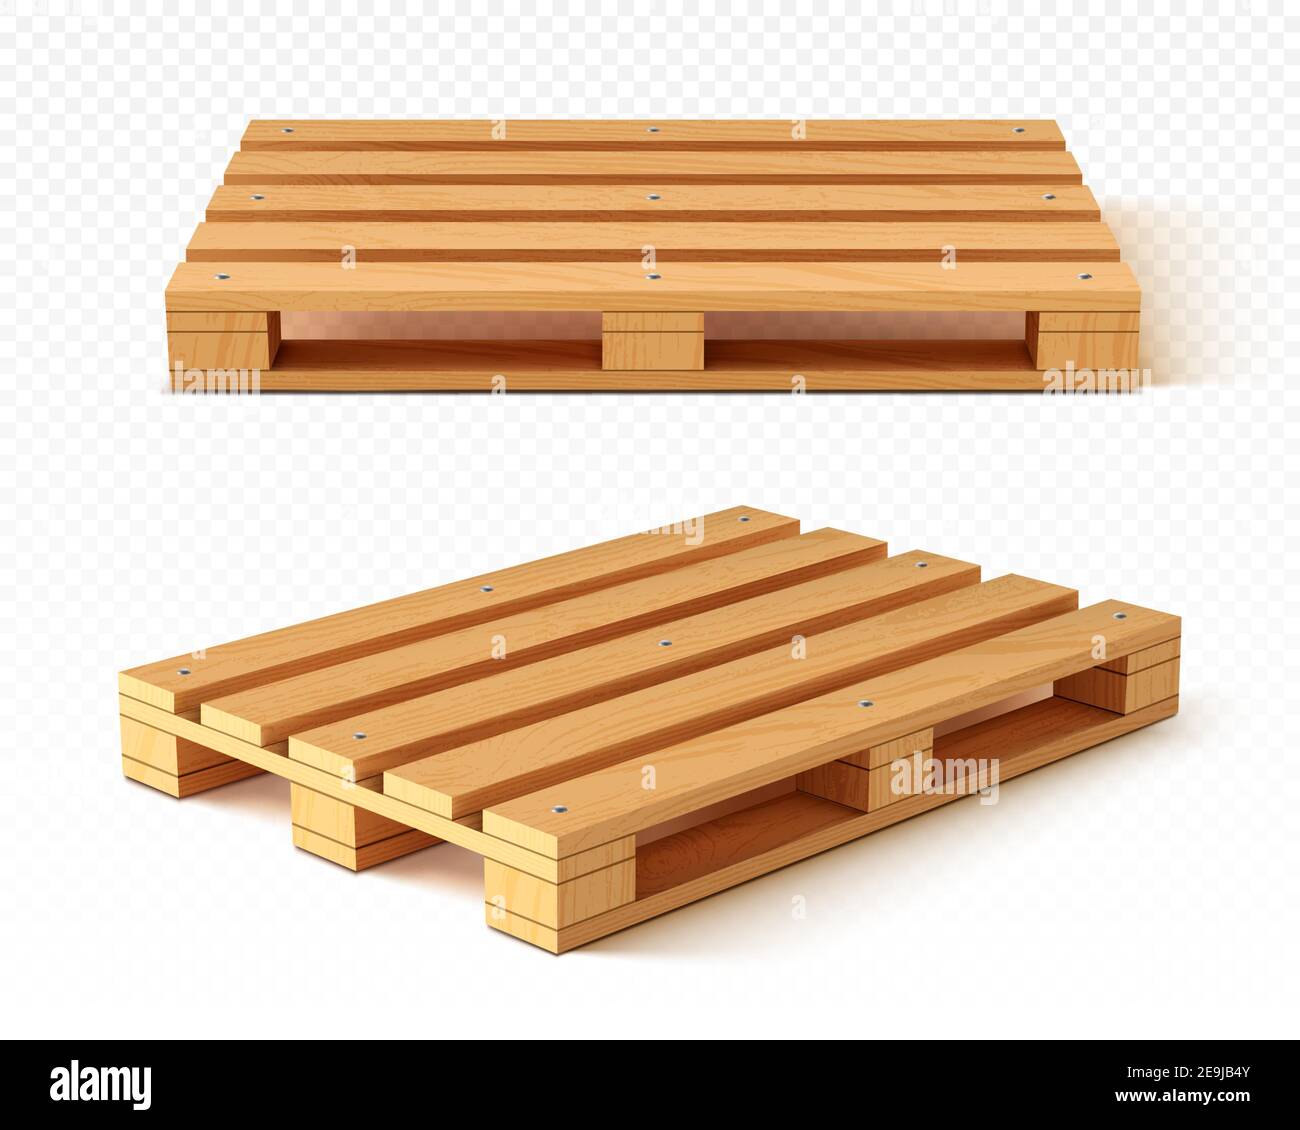 Wooden pallet front and angle view. Wood trays for cargo loading and transportation. Freight delivery, warehousing service equipment isolated on transparent background Realistic 3d vector illustration Stock Vector